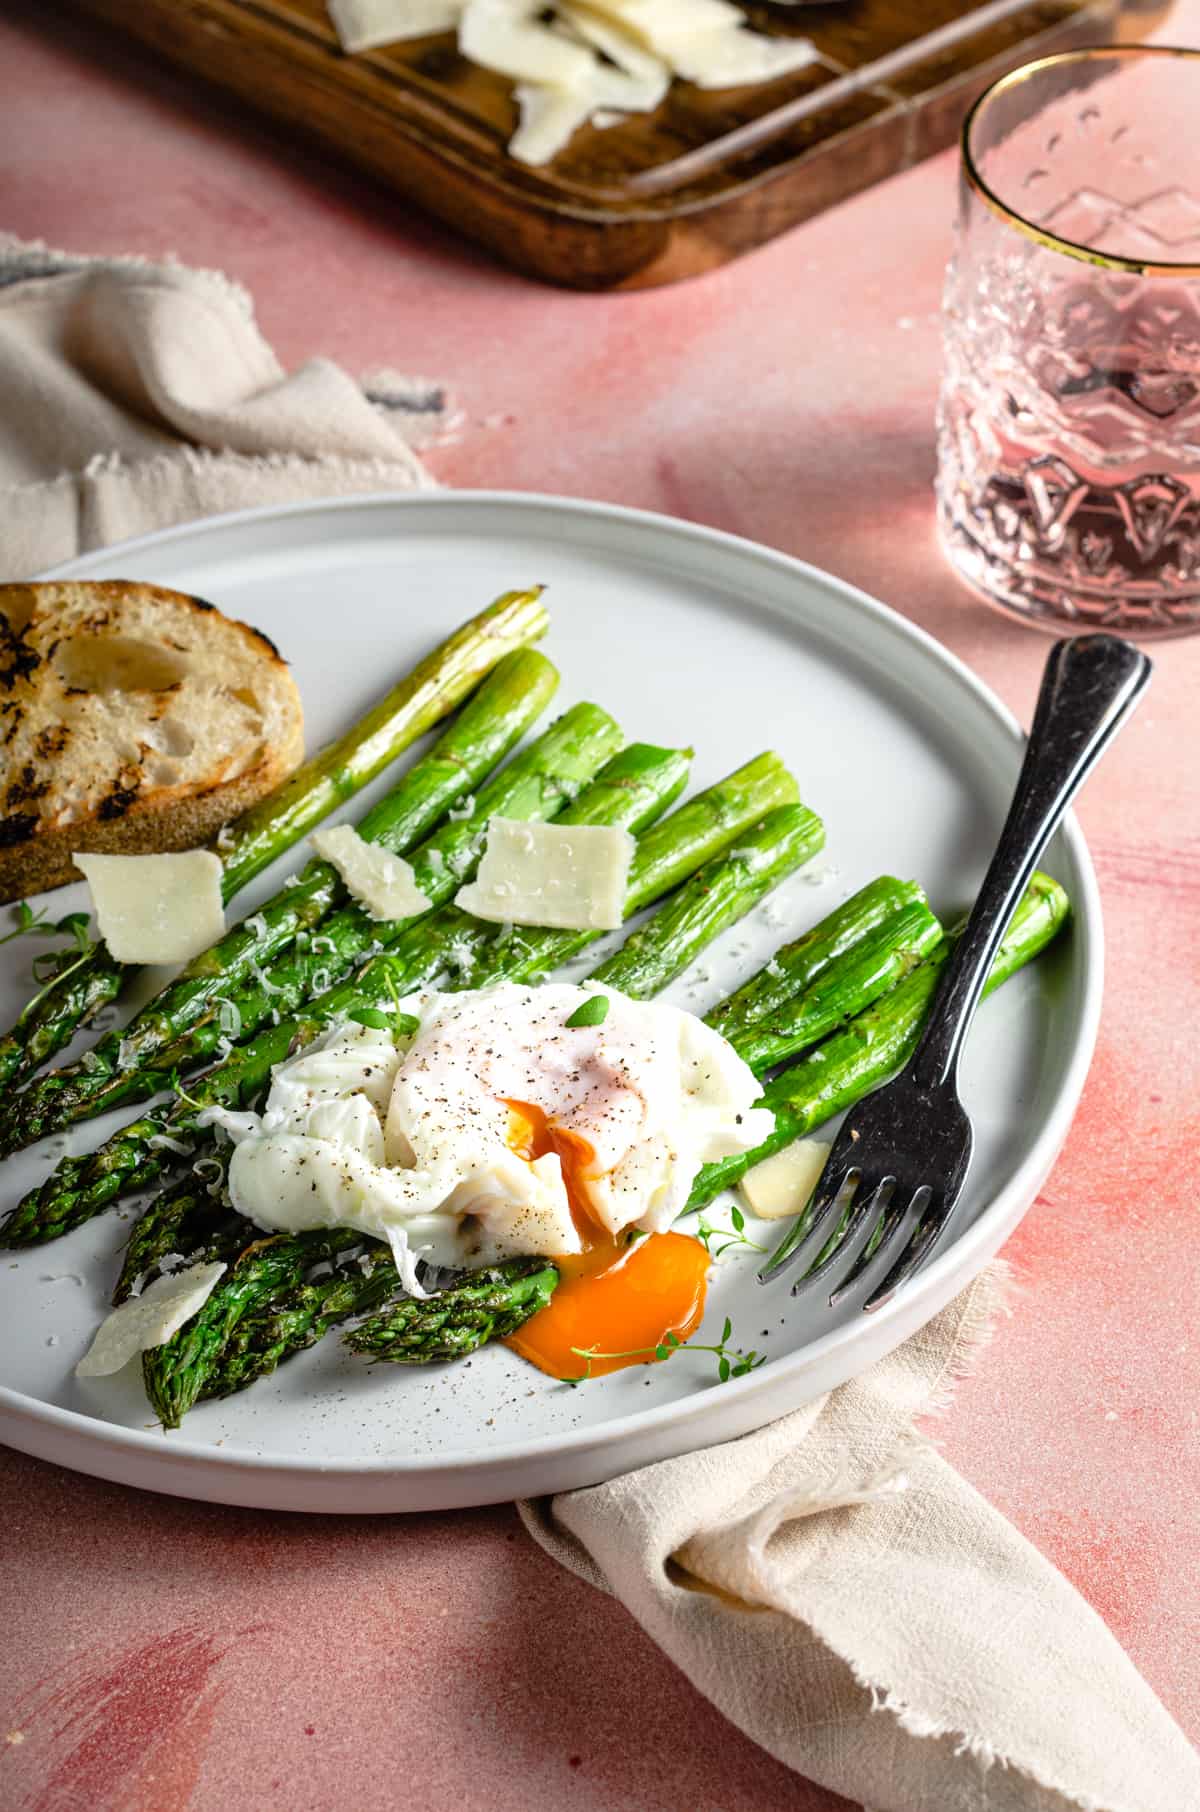 A brunch scene of roasted asparagus topped with a poached egg and shavings of parmesan cheese.